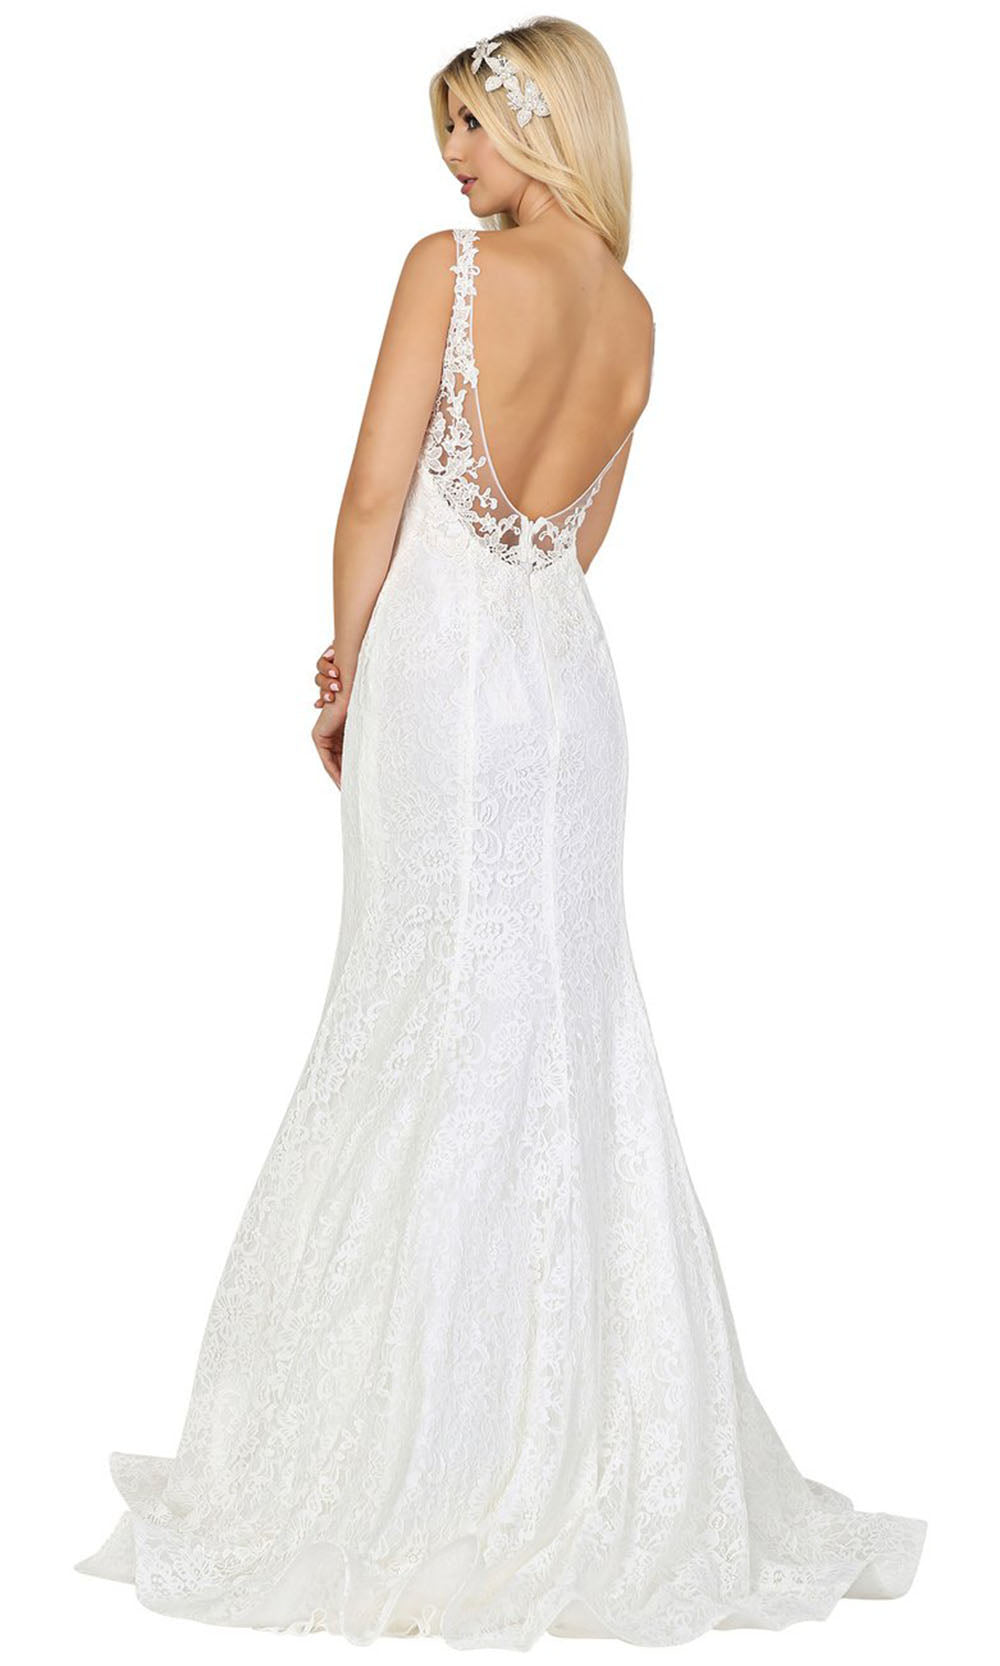 Dancing Queen - 151 Sleeveless V Neck Lace Bridal Gown In White